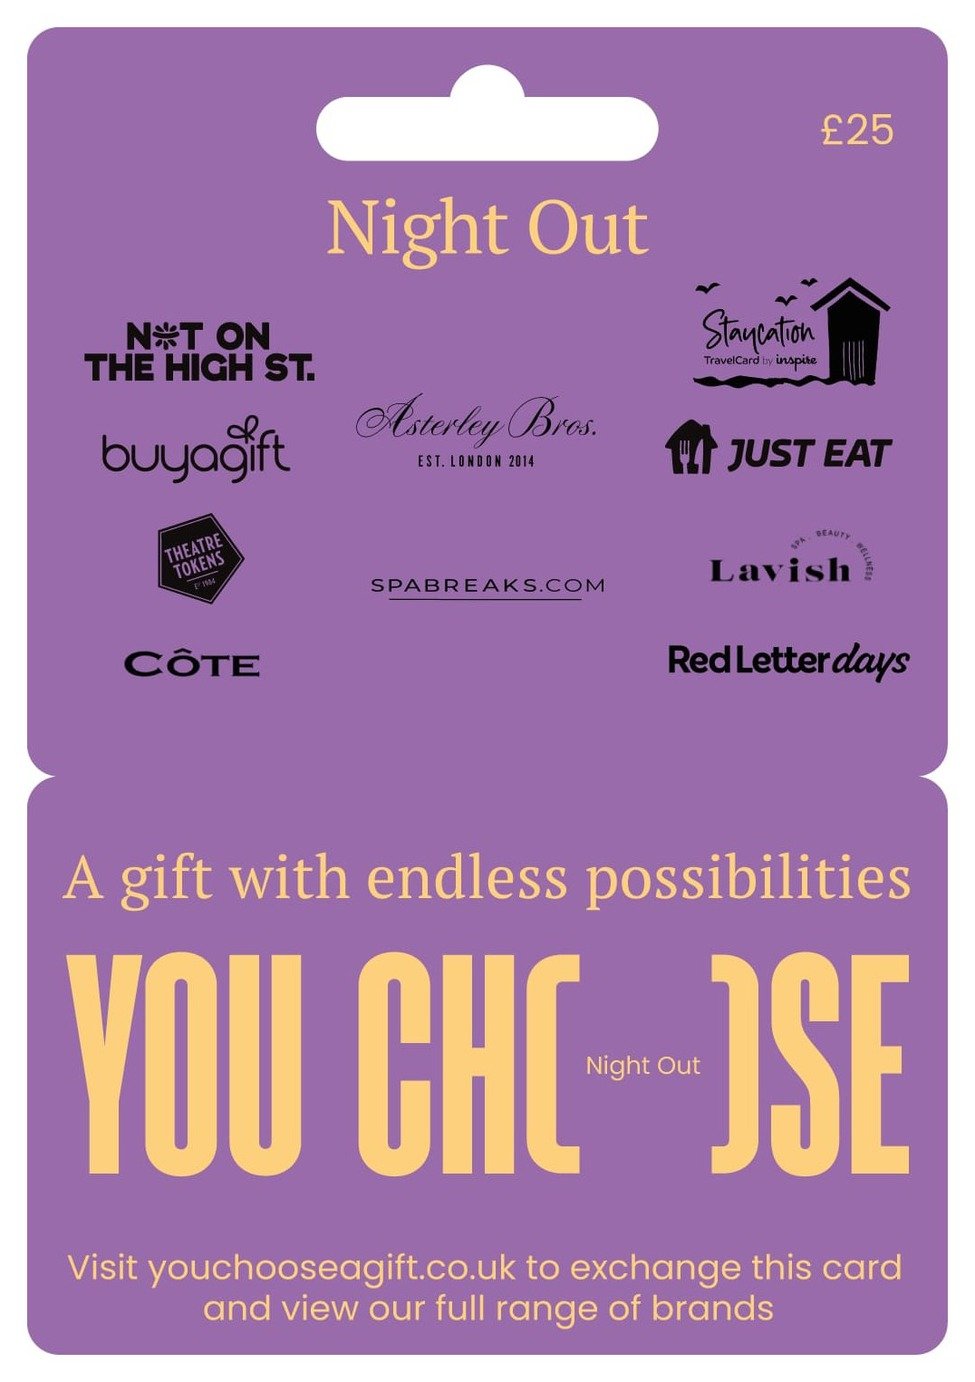 You Choose Night Out 25 GBP Gift Card